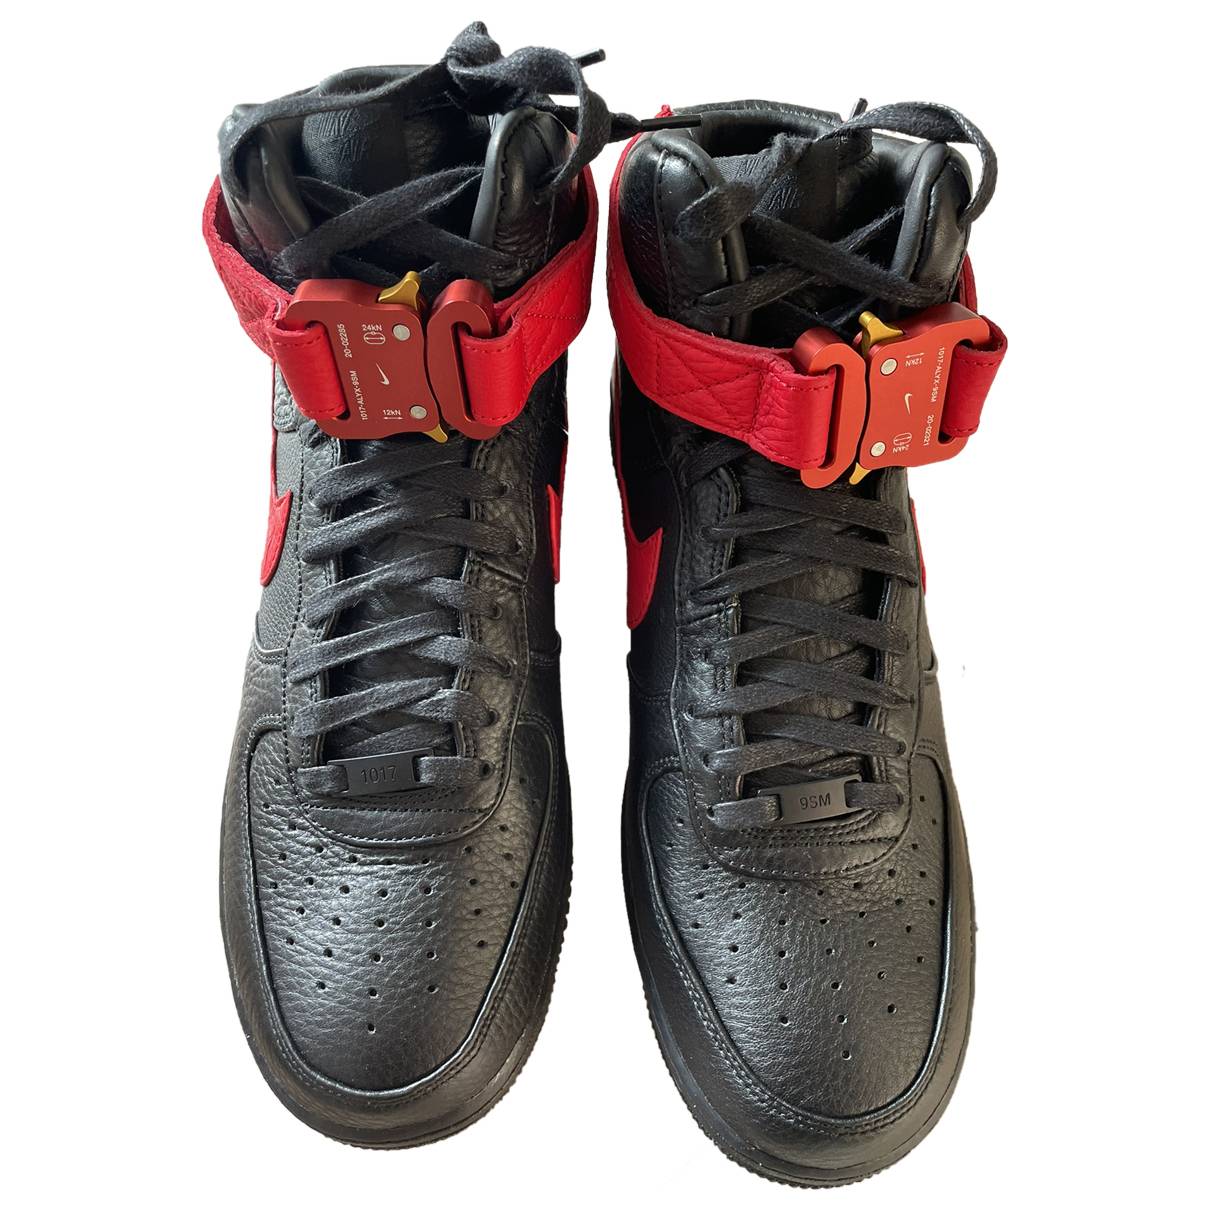 Air Force 1 High Alyx Black University Red